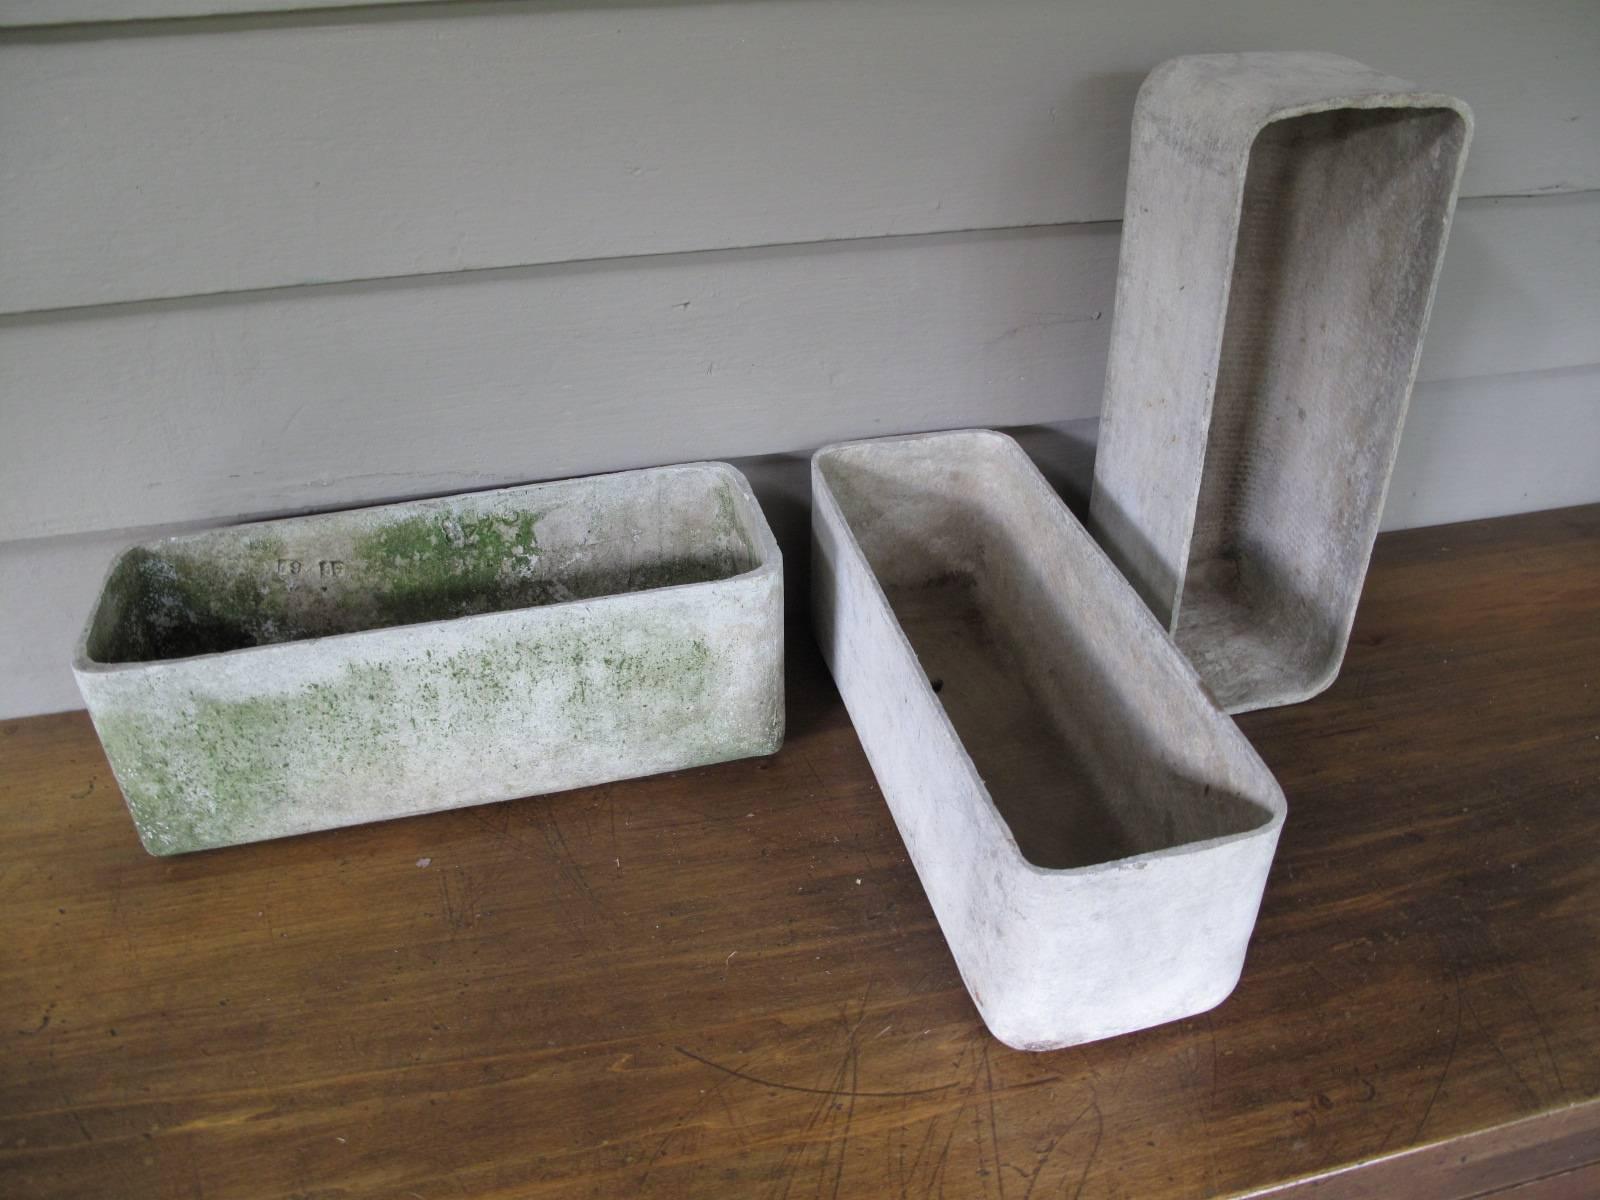 Three similar molded fibercrete planters in the manner of Willy Guhl. One planter has numerical markings consistent with original Willy Guhl concrete items while the other two do not and are possibly later production runs from Eternit.